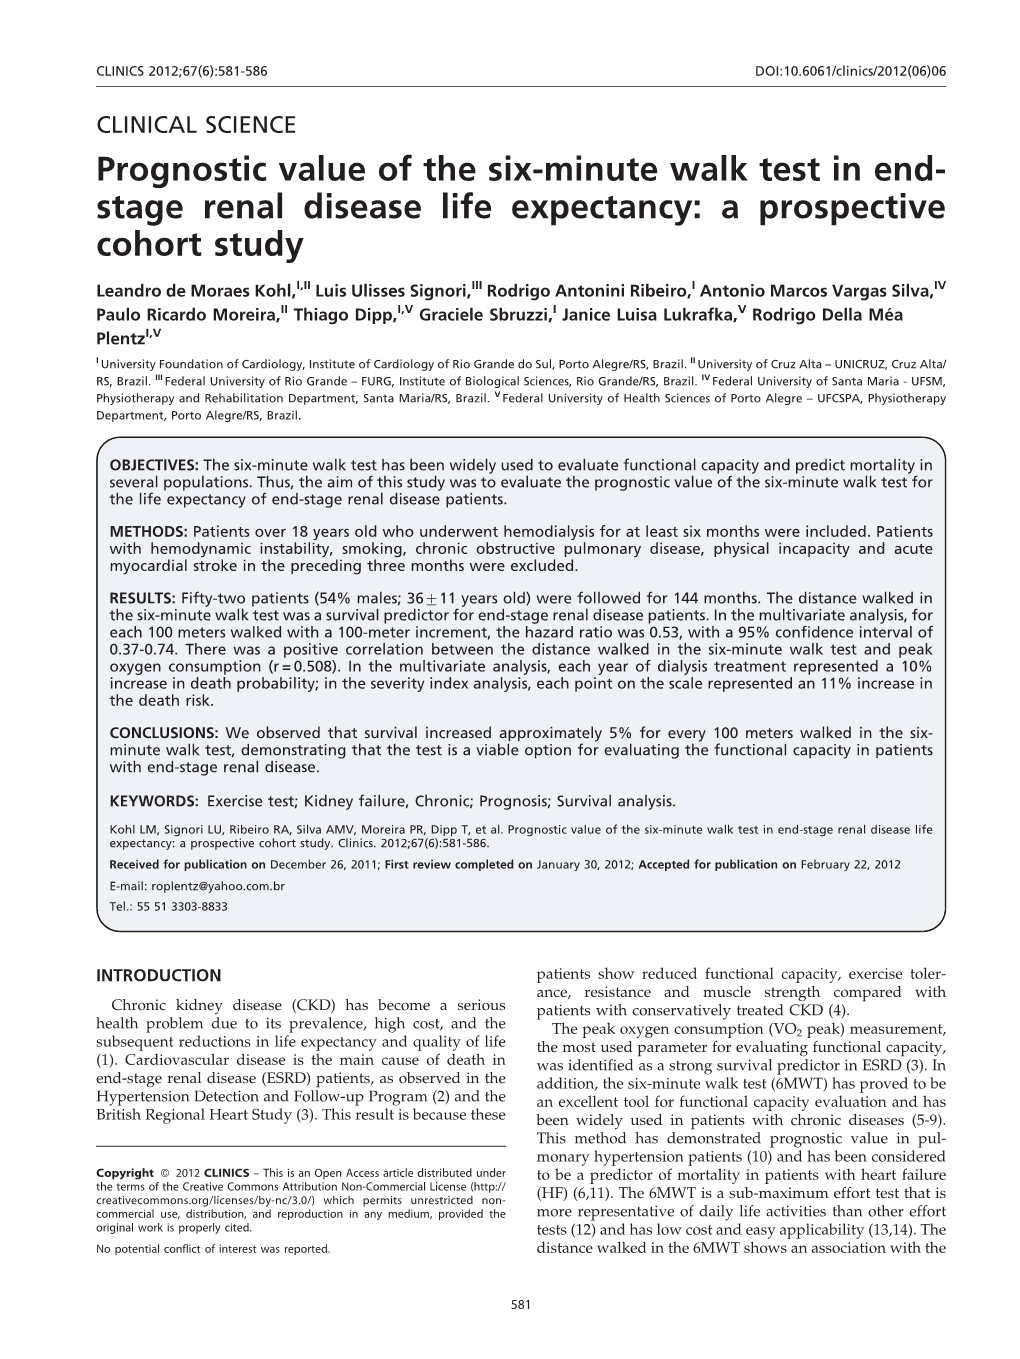 Prognostic Value of the Six-Minute Walk Test in End- Stage Renal Disease Life Expectancy: a Prospective Cohort Study